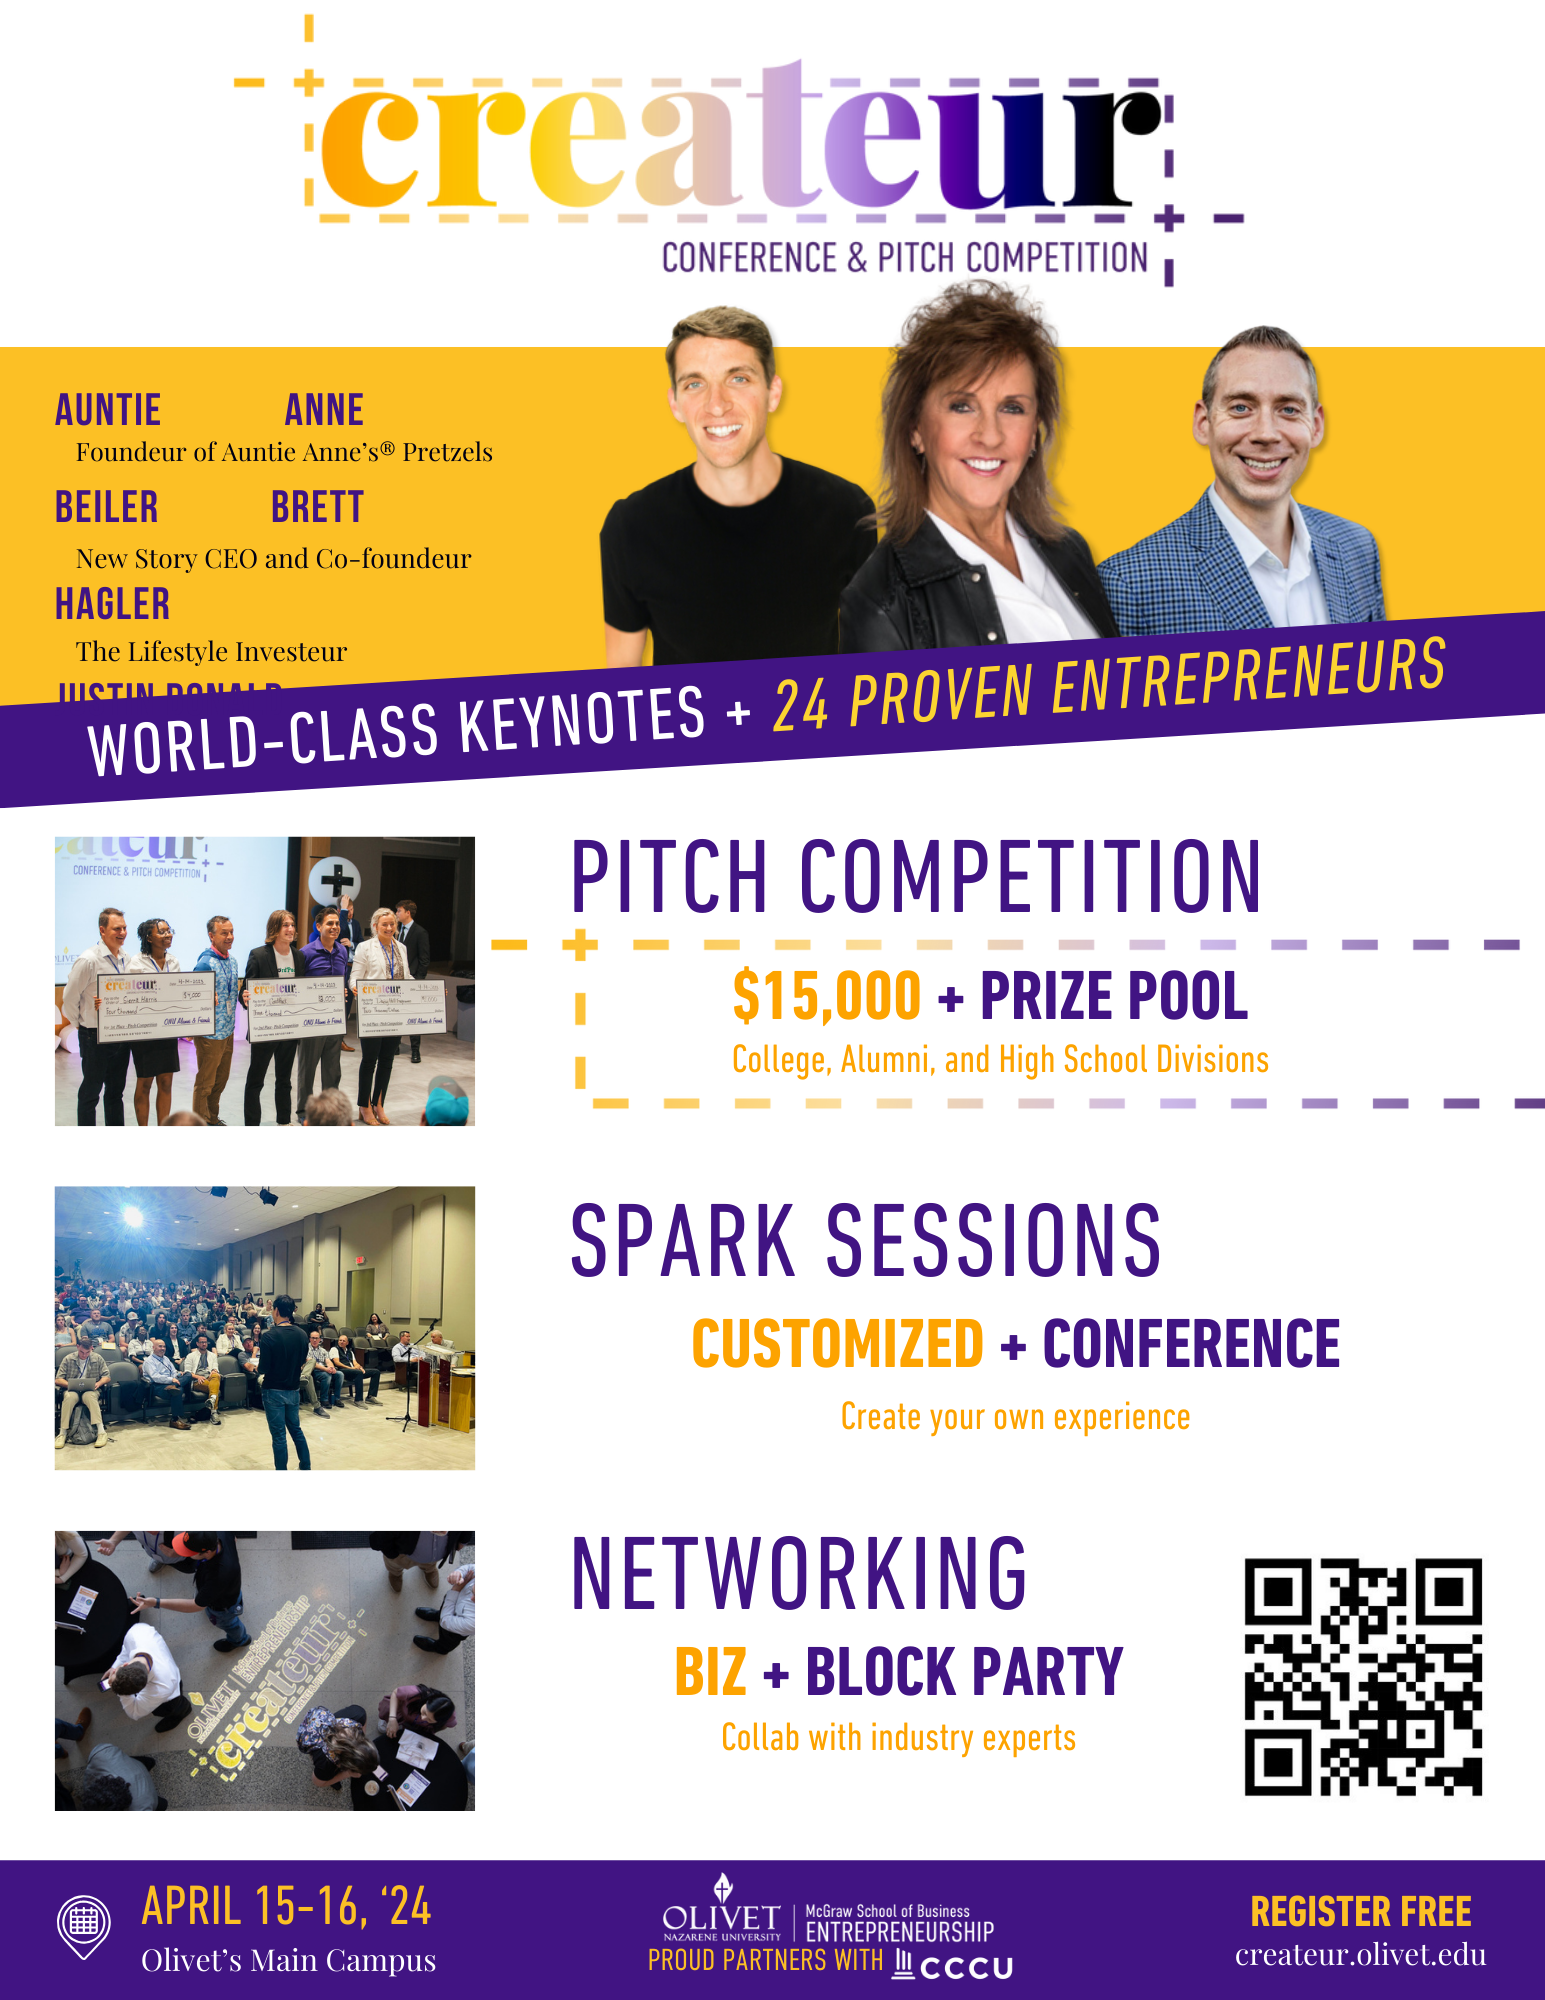 The Second Annual Createur Conference & Pitch Competition, presented by the McGraw School of Business at Olivet Nazarene University